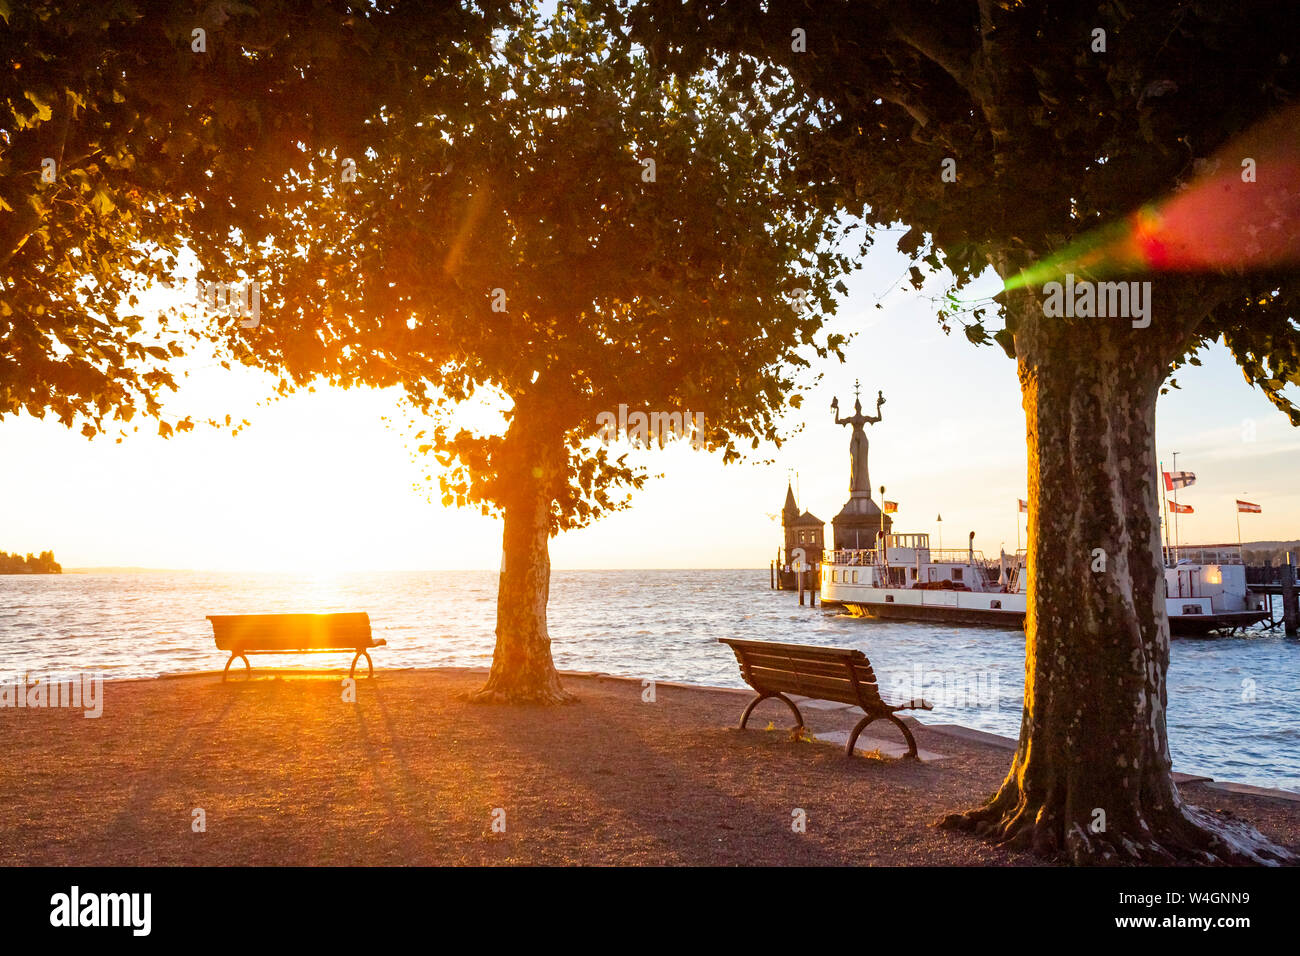 Constance, harbor, Lake Constance, Germany Stock Photo